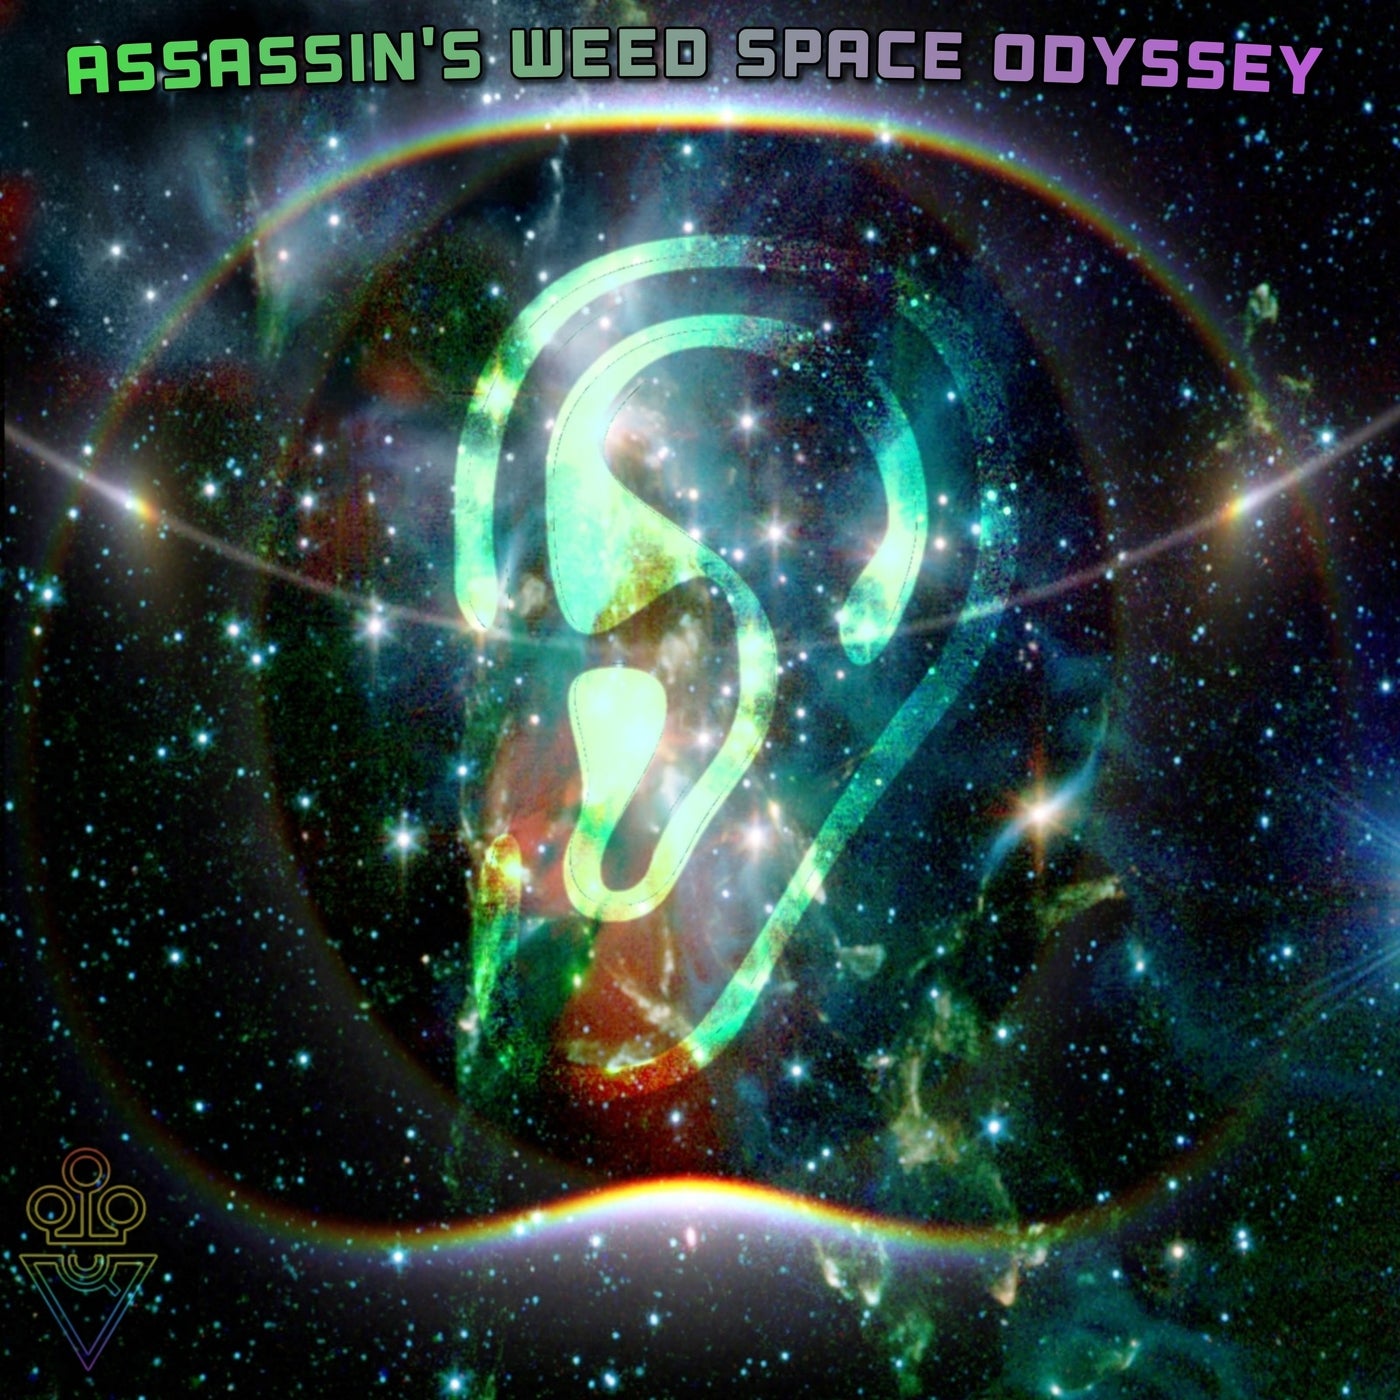 Assassin's Weed Space Odyssey